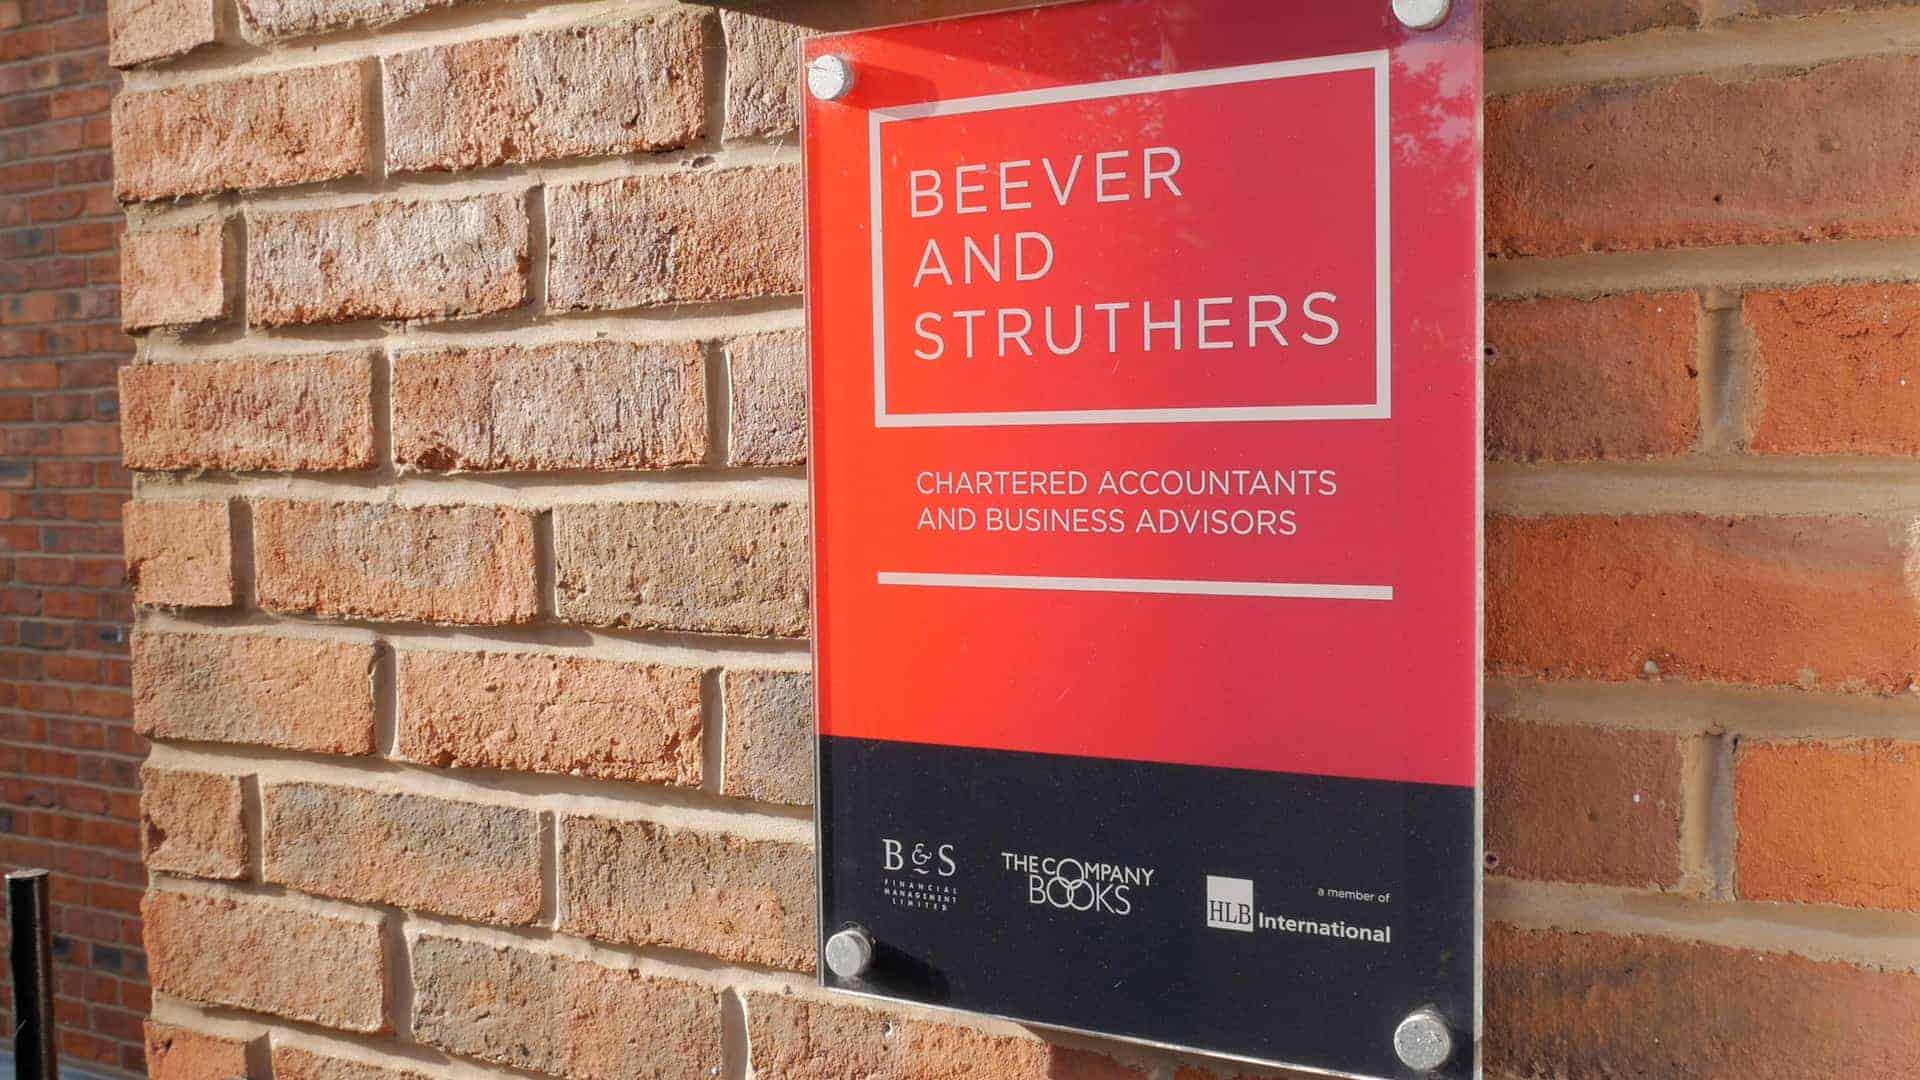 Unleashed Customer - Fusion Paper/Beever & Struthers